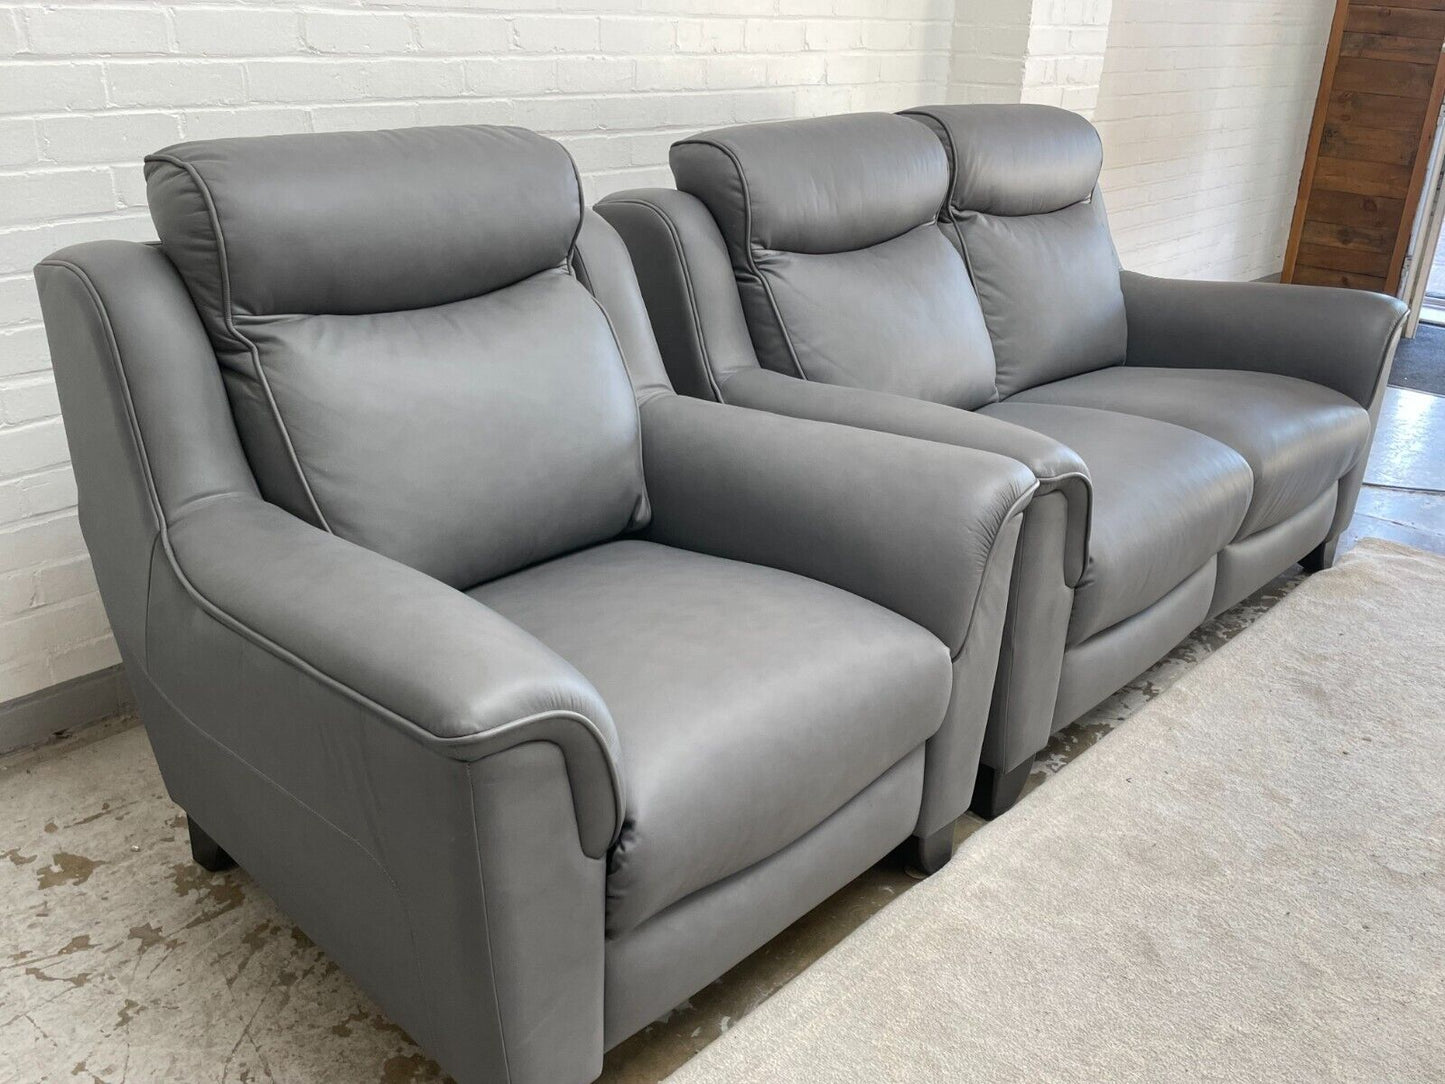 Parker Knoll Manhattan Grey Real Leather 2+1 Seater Sofas